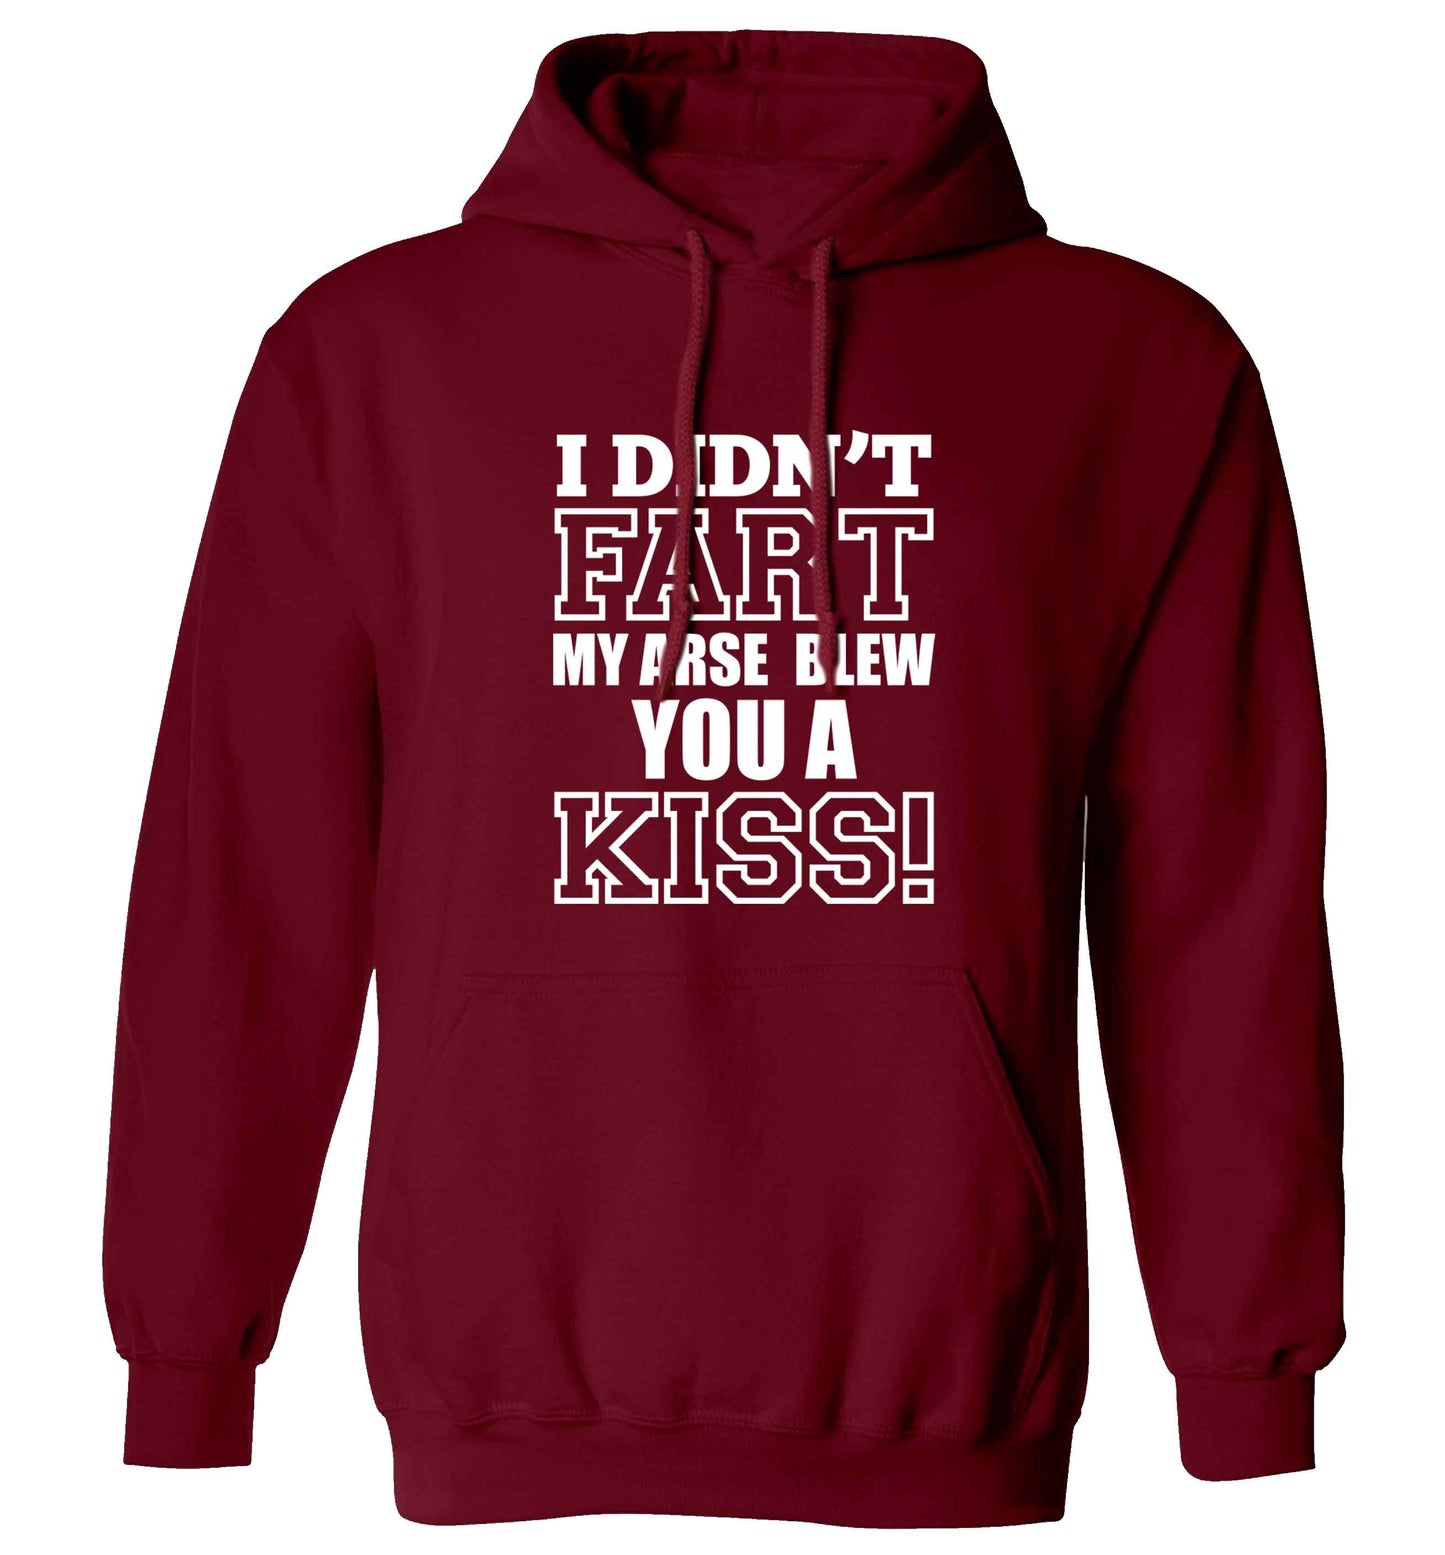 I didn't fart my arse blew you a kiss adults unisex maroon hoodie 2XL